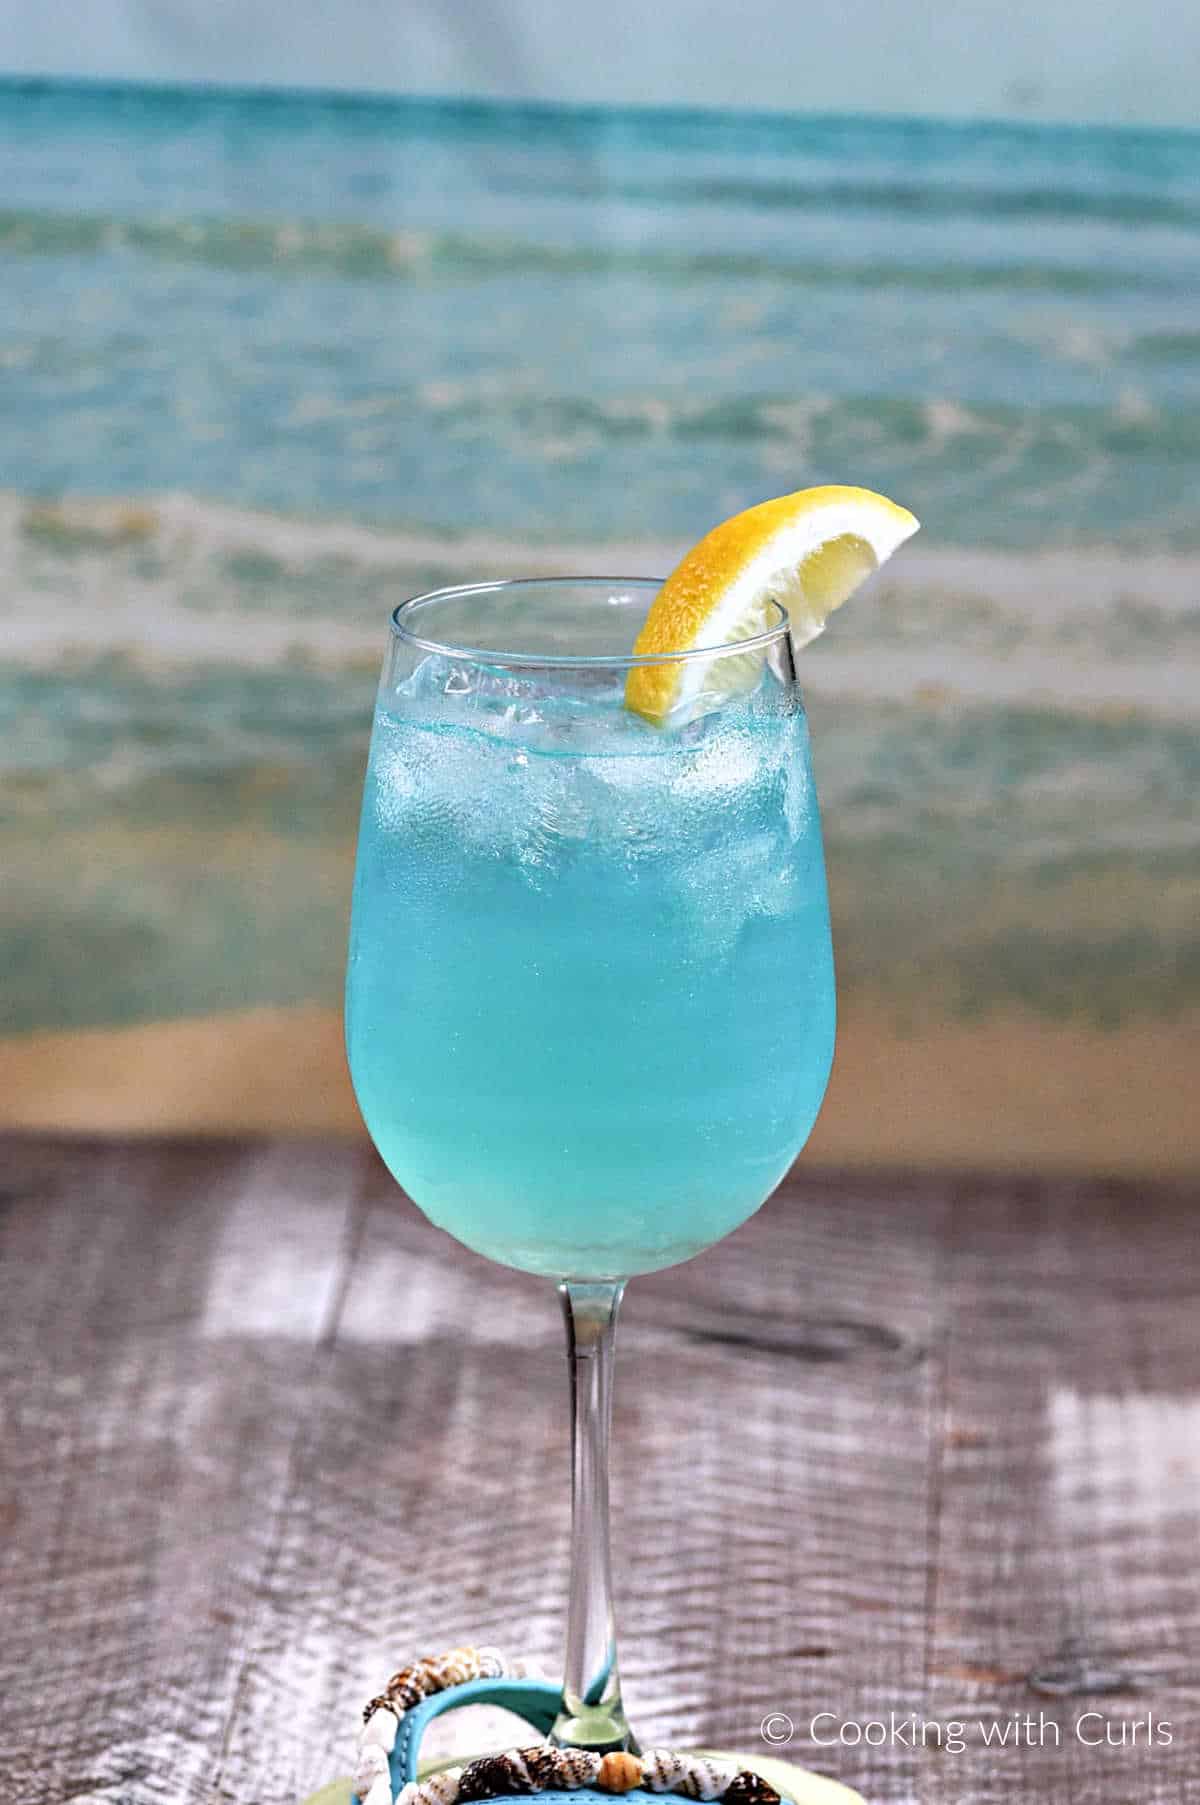 Teal blue cocktail with ice in a wine glass with a lemon wedge in front of an ocean waves background.